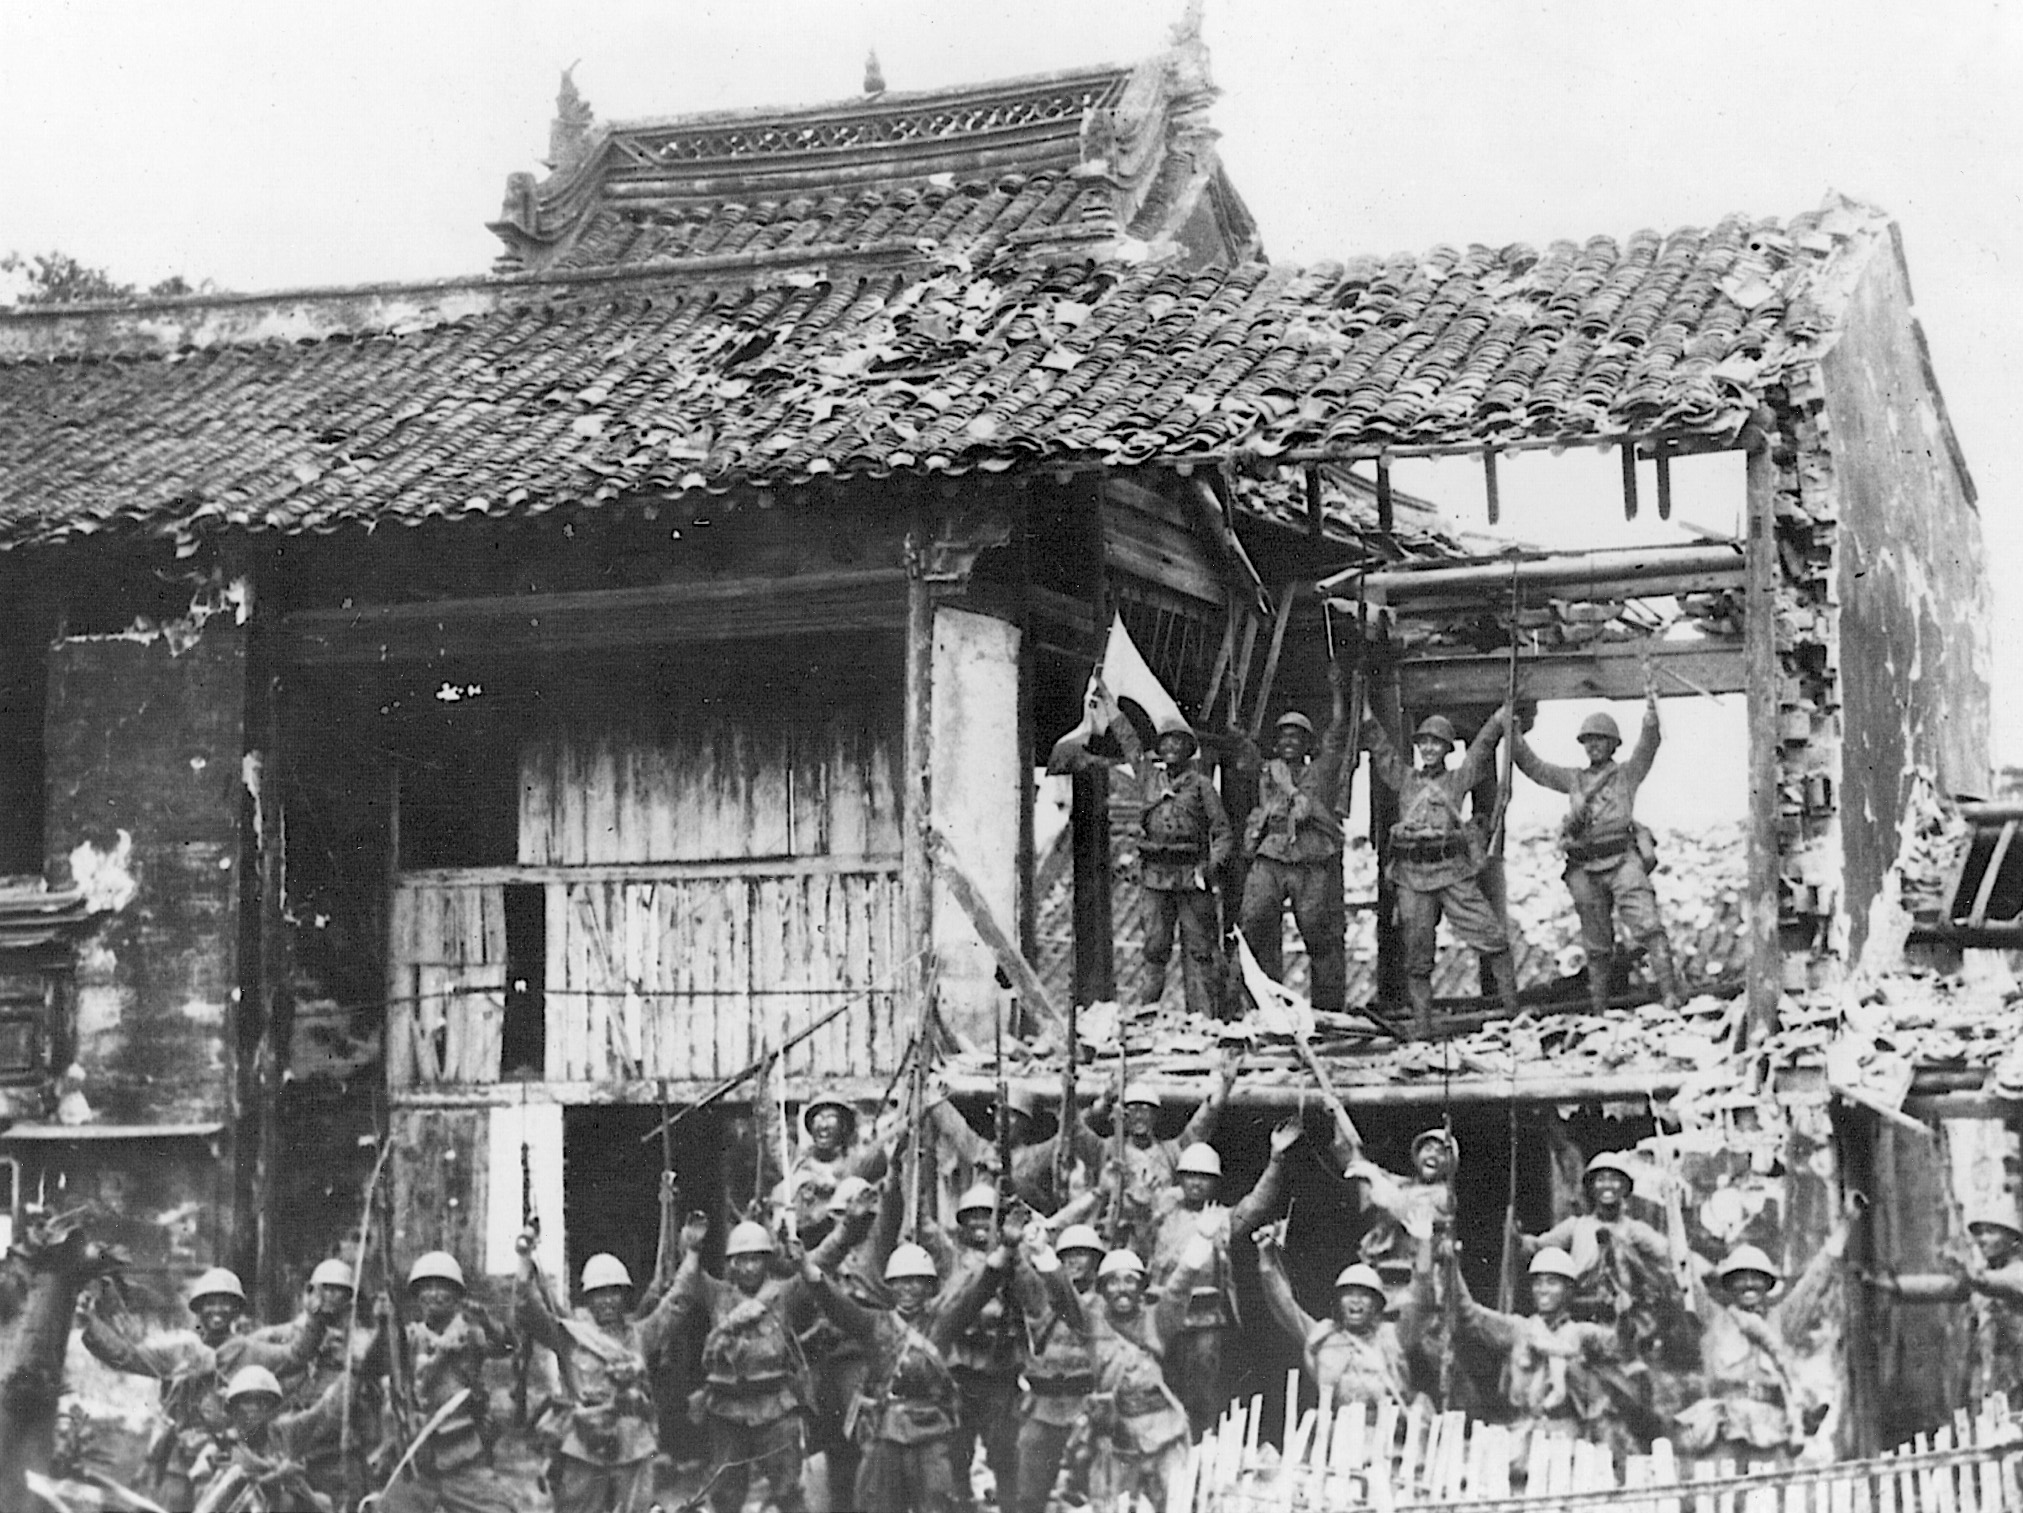 Celebrating their victory in Shanghai on October 21, 1937, Japanese soldiers shout a triumphant “Banzai” from the hollow of a bombed-out building.